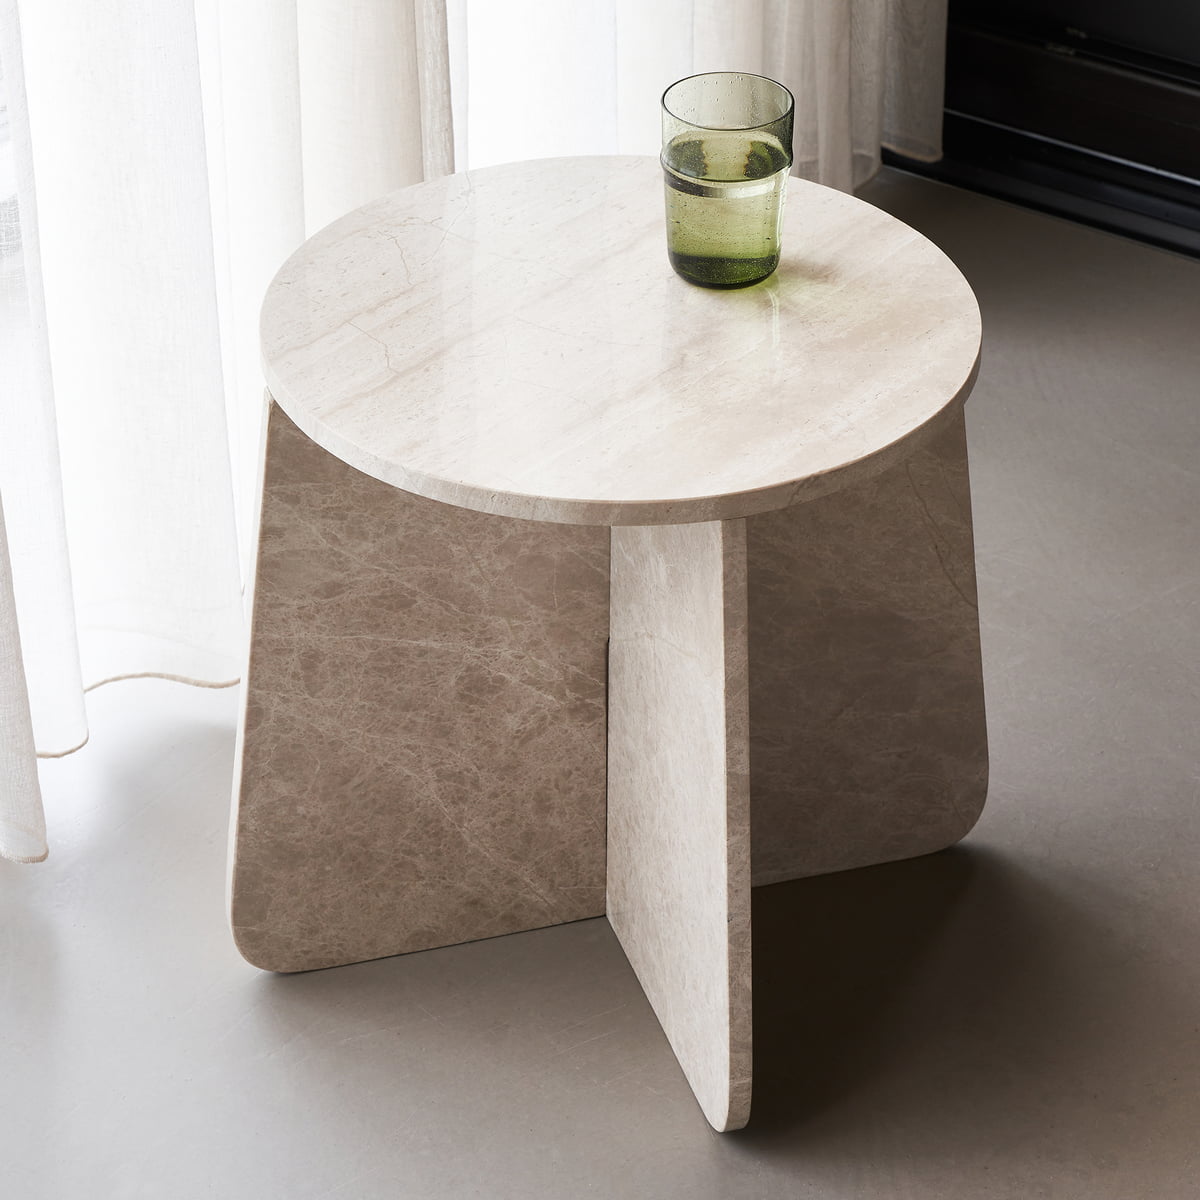 Marb side table - Marble side table by House Doctor